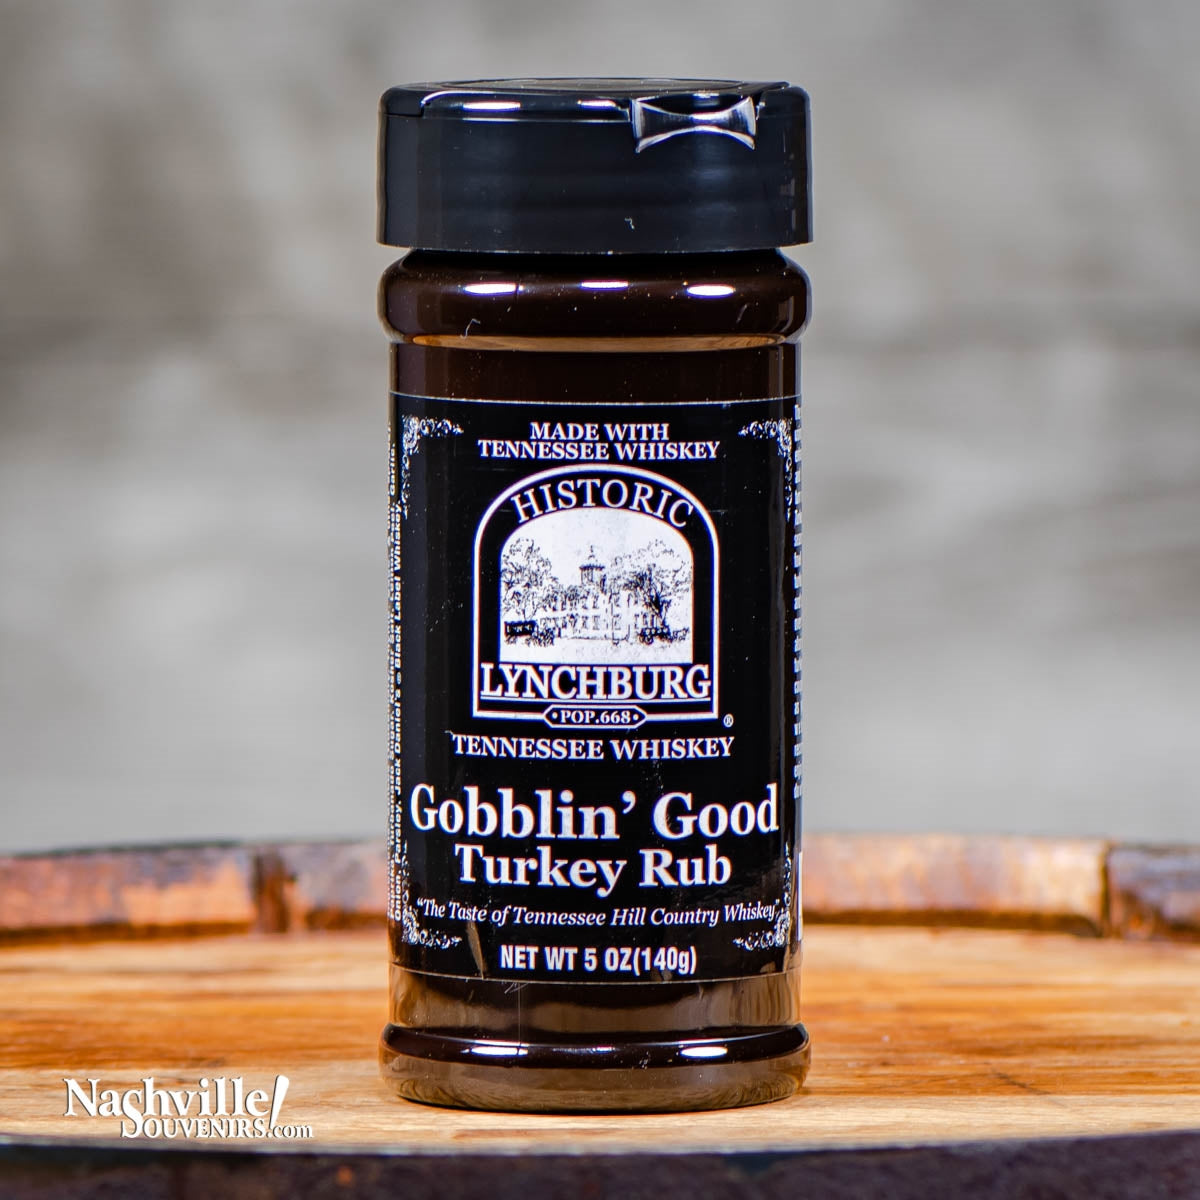 Buy Historic Lynchburg Gobblin Good Turkey Rub containing real Jack Daniels Tennessee whiskey . FREE SHIPPING on all US orders over $75!